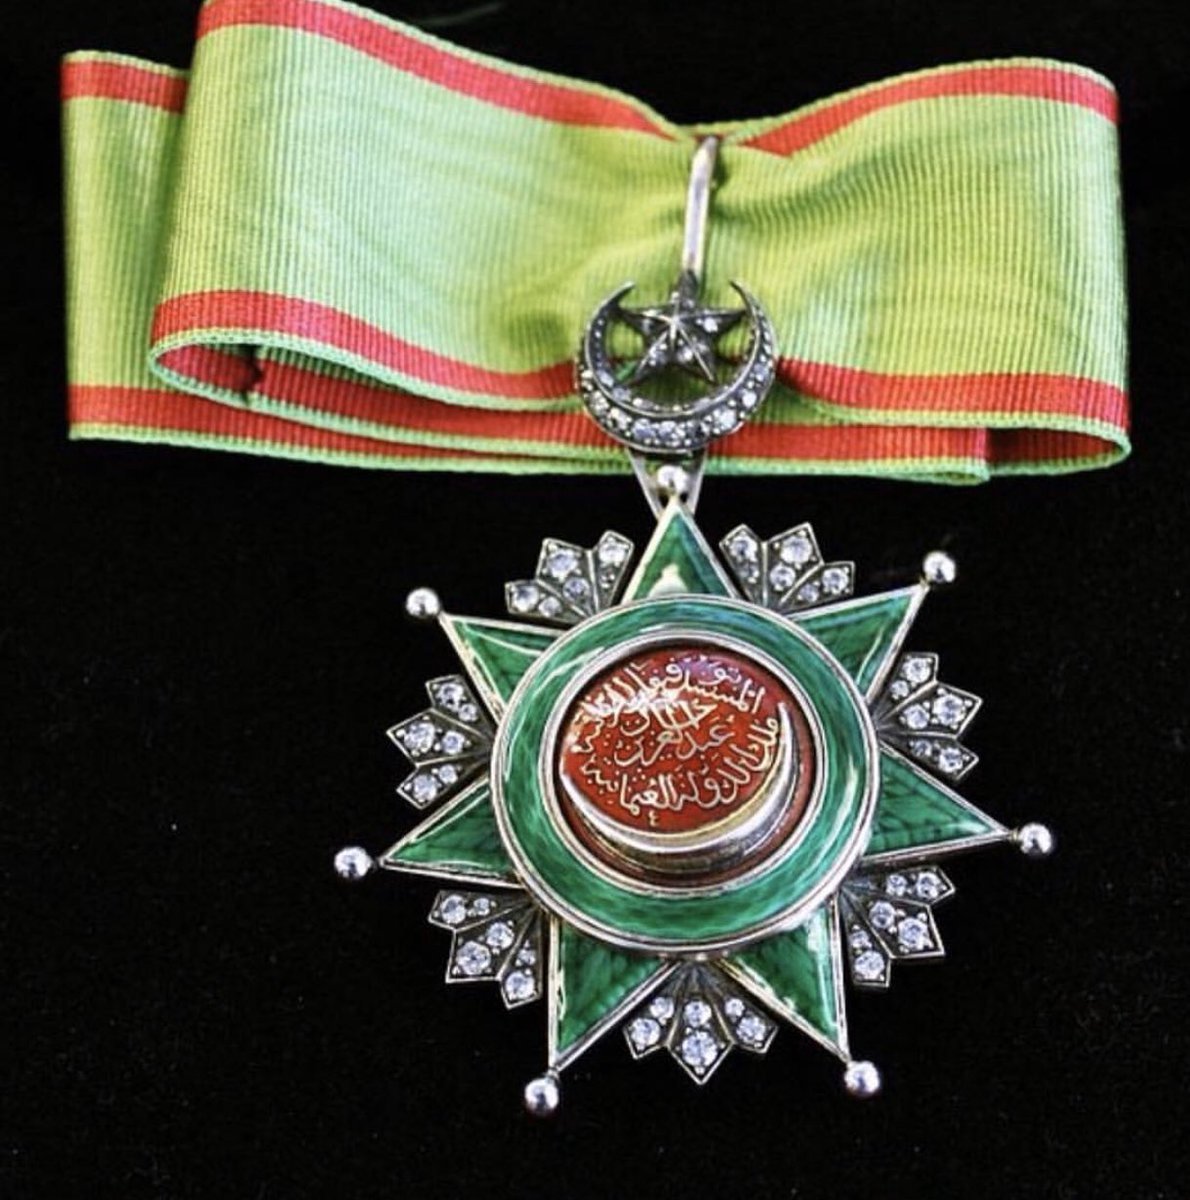 Dr. Ansari was conferred one of the highest honours of the  #Ottoman Empire, “The Order of the Osmanieh” by the Ottoman Sultan for his services to the Ottoman Empire. #Turkey  #Khilafat